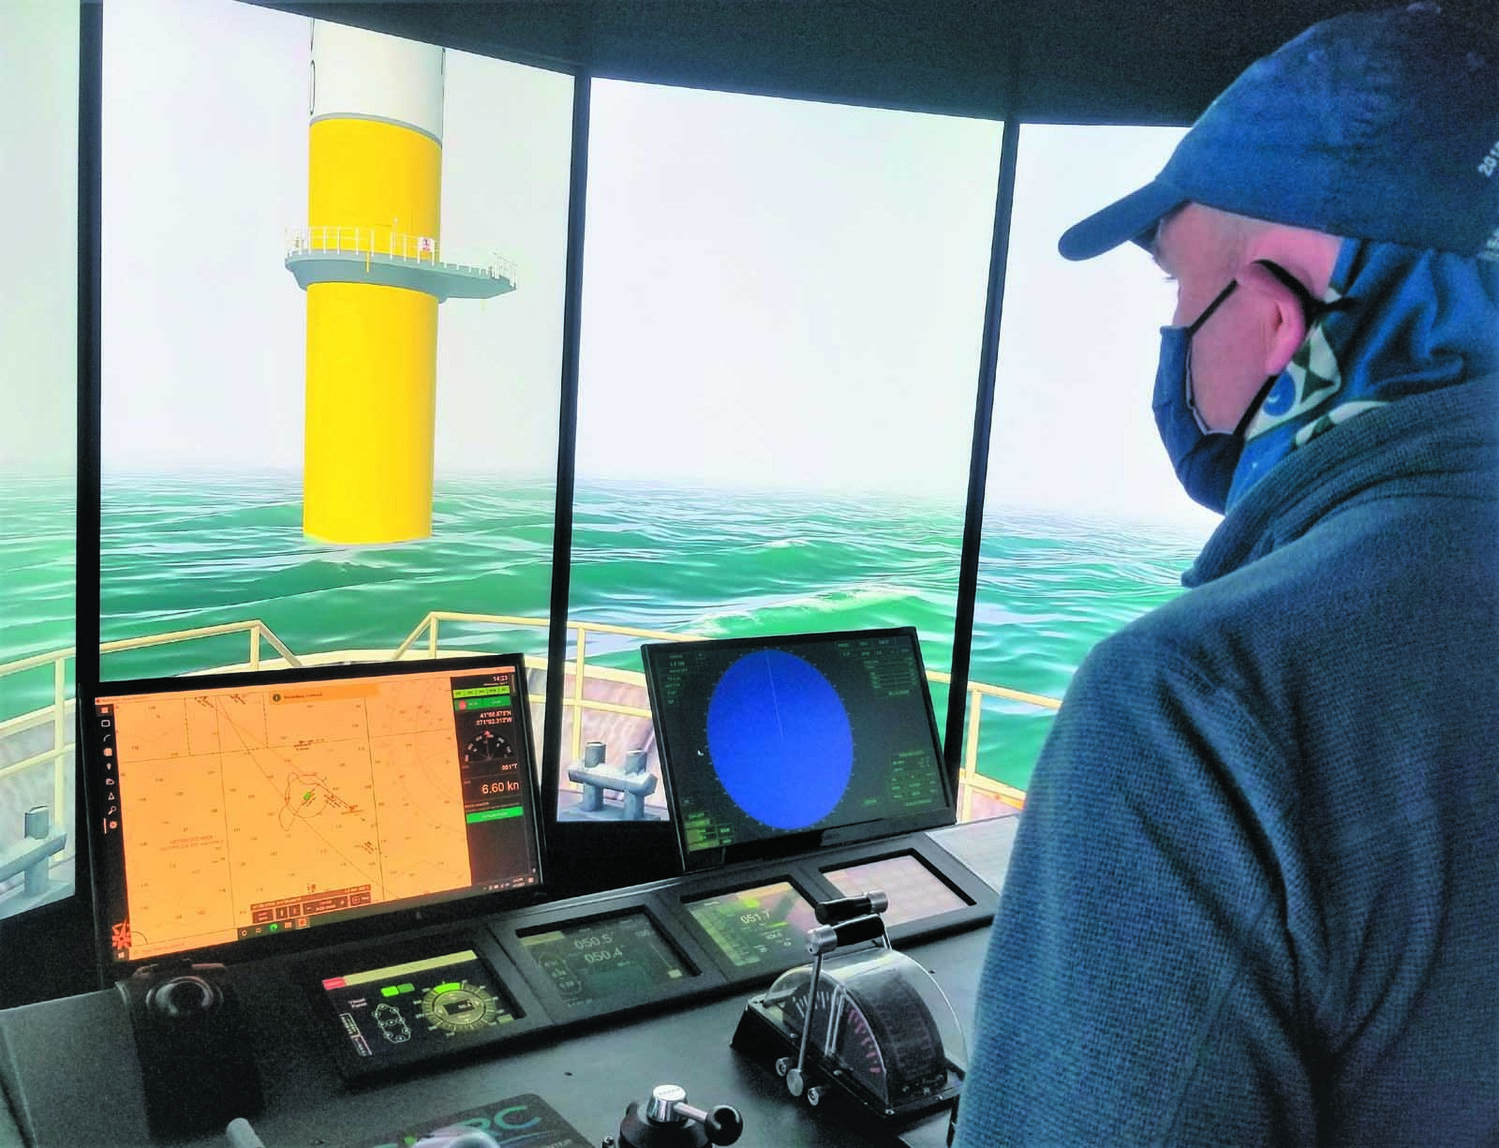 TAKING CAPTAINS TO SCHOOL: Capt. Patrick Cassidy, charter captain and captain’s school instructor, maneuvers around a pylon in the Revolution wind farm using a training simulator.